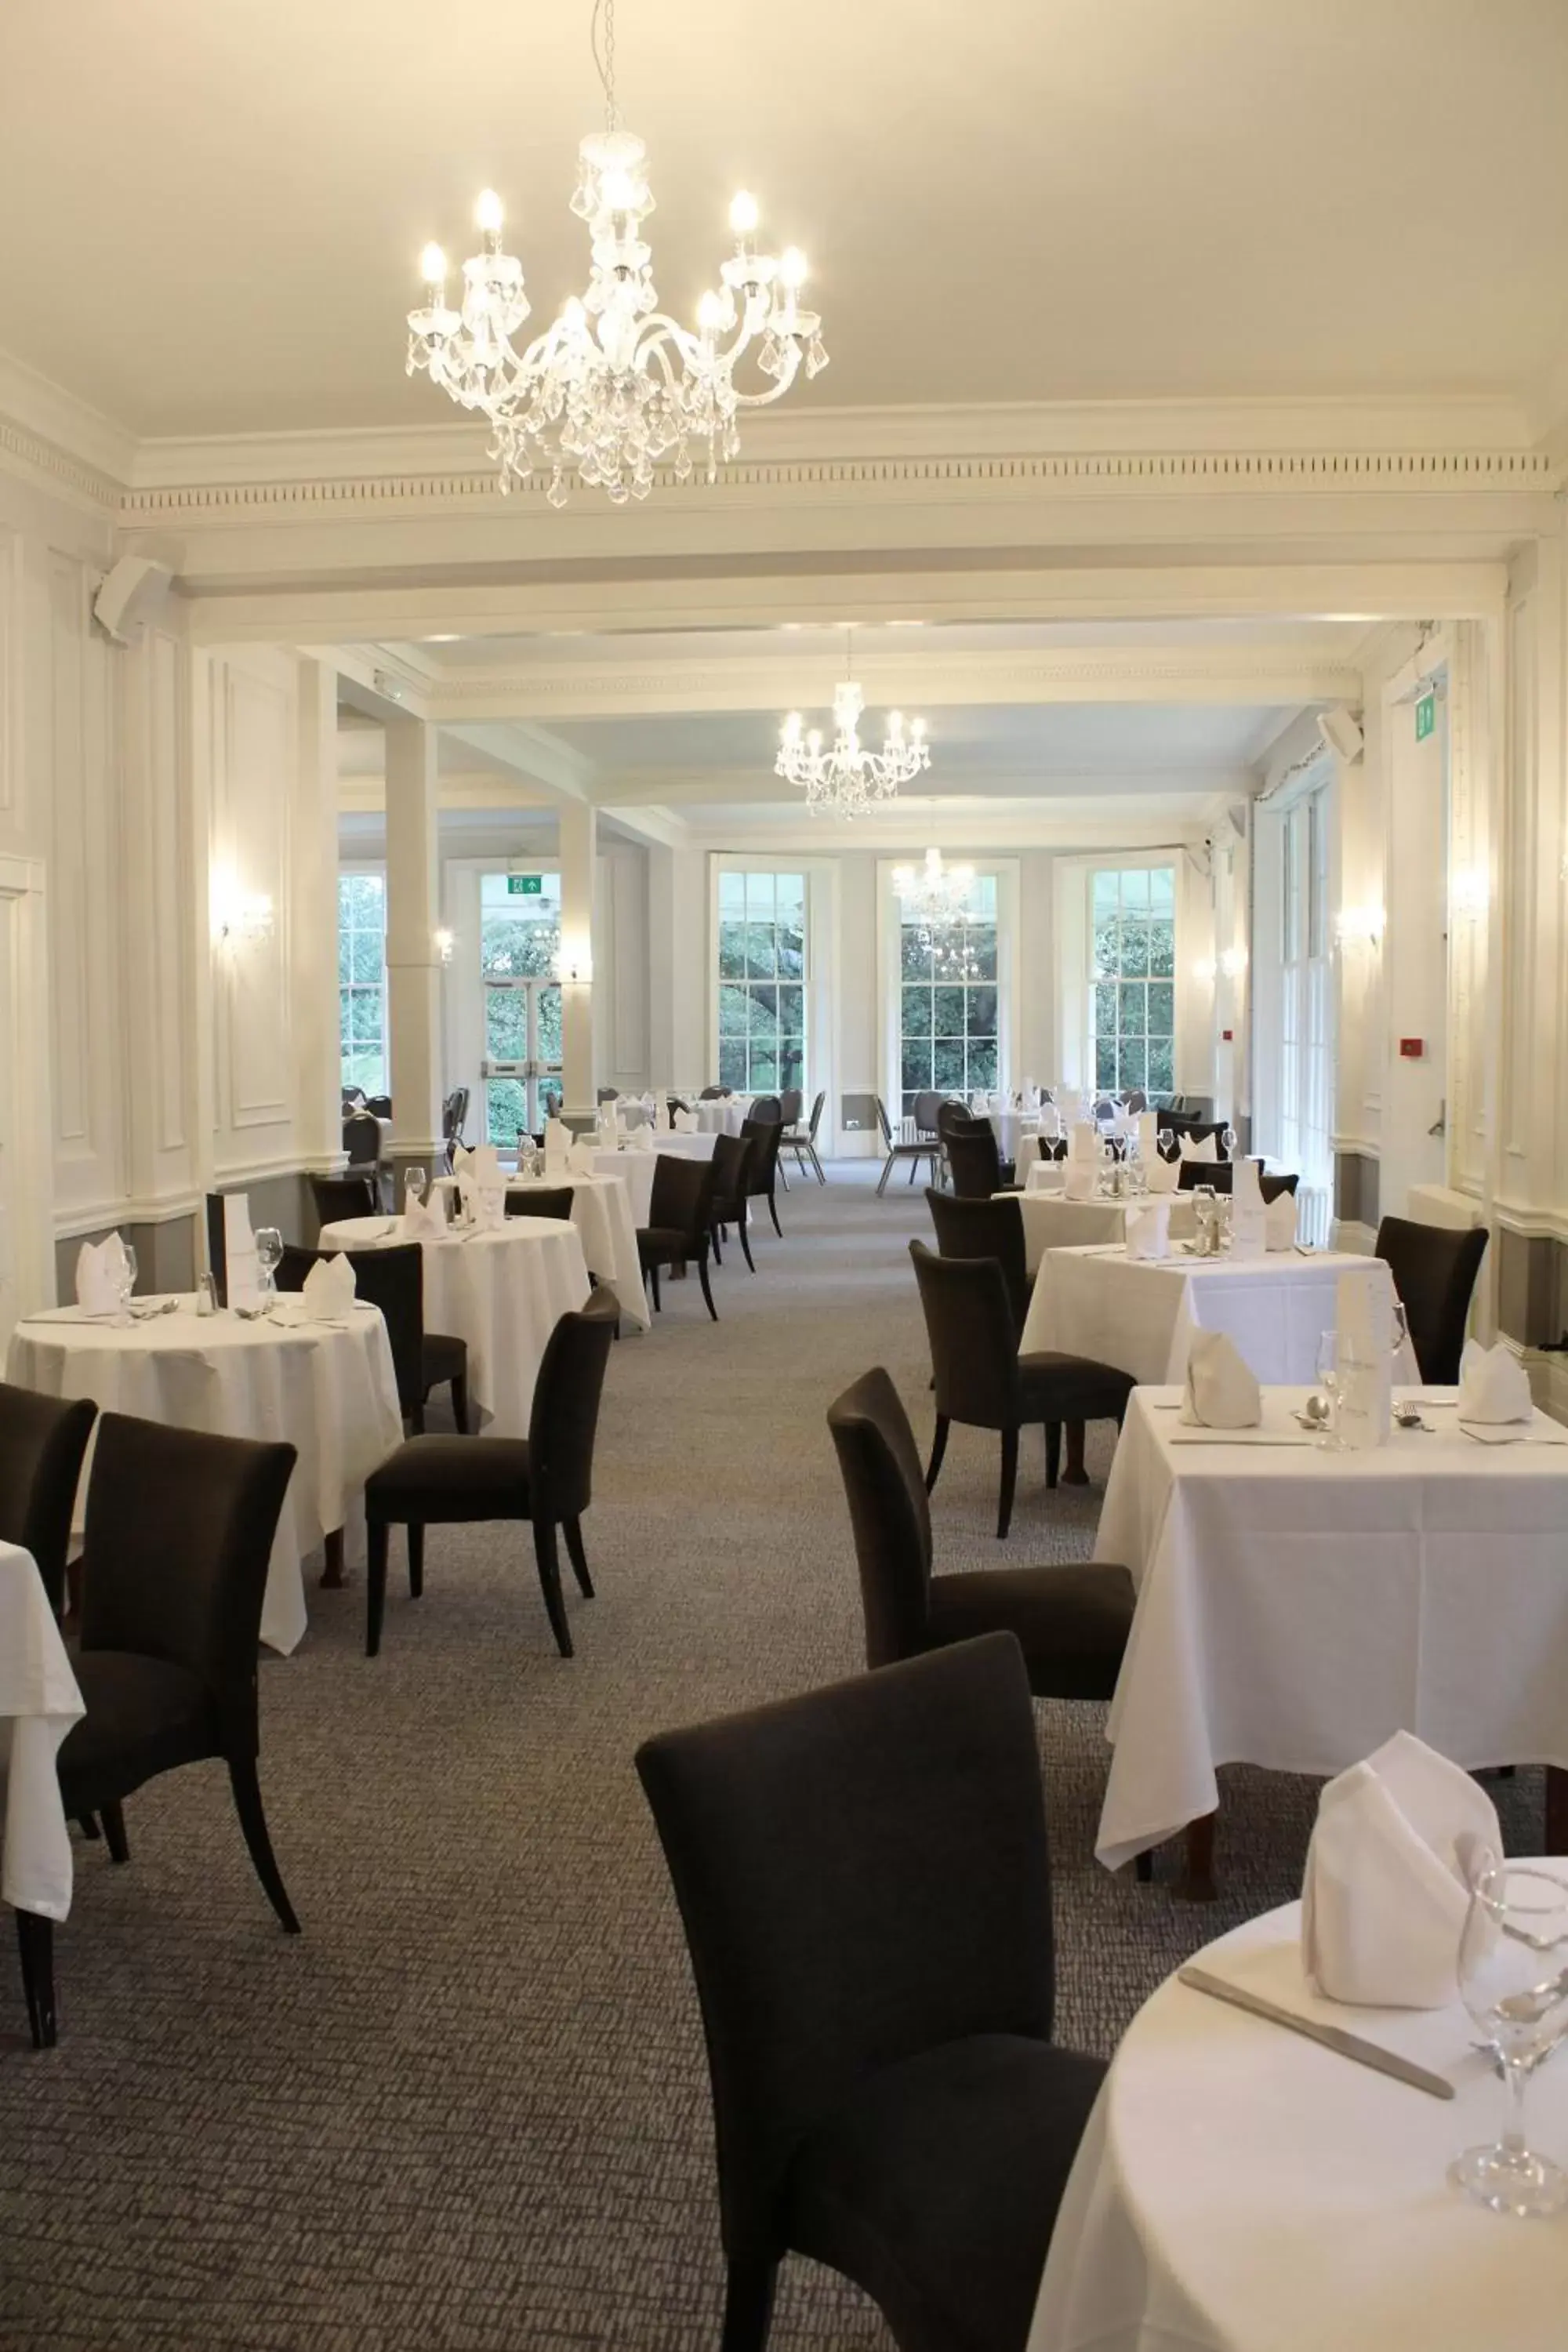 Restaurant/Places to Eat in Stifford Hall Hotel Thurrock